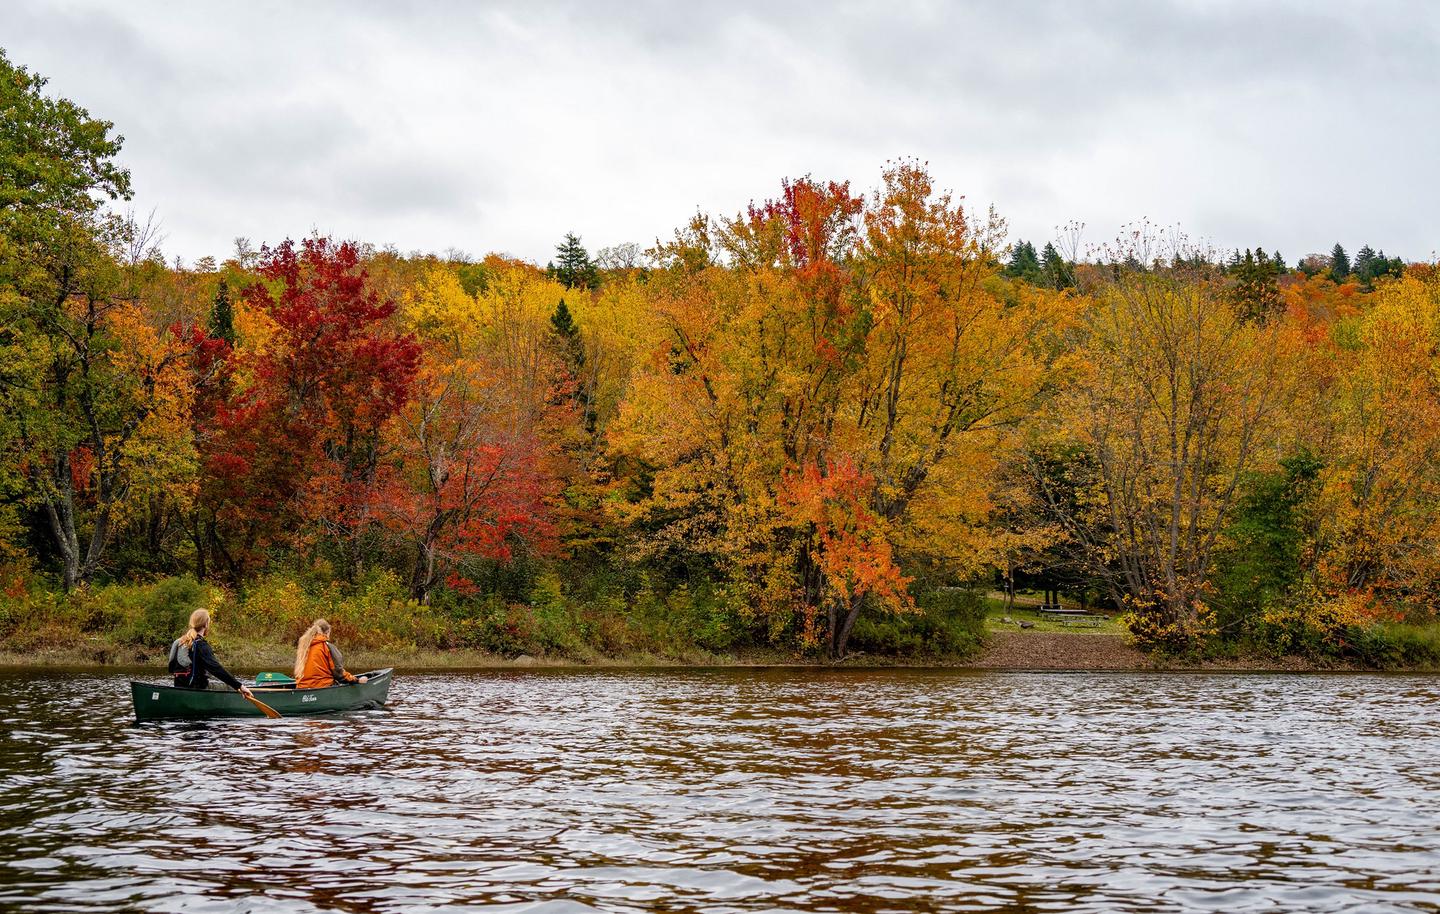 Two people in a canoe navigate towards a clearing (Lunksoos Boat Launch) on a cloudy day. Colorful golden and red tress with evergreens decorate the landscape. Lunksoos Campground can be accessible by boat! Enjoy the views of the East Branch of the Penobscot River during your stay.